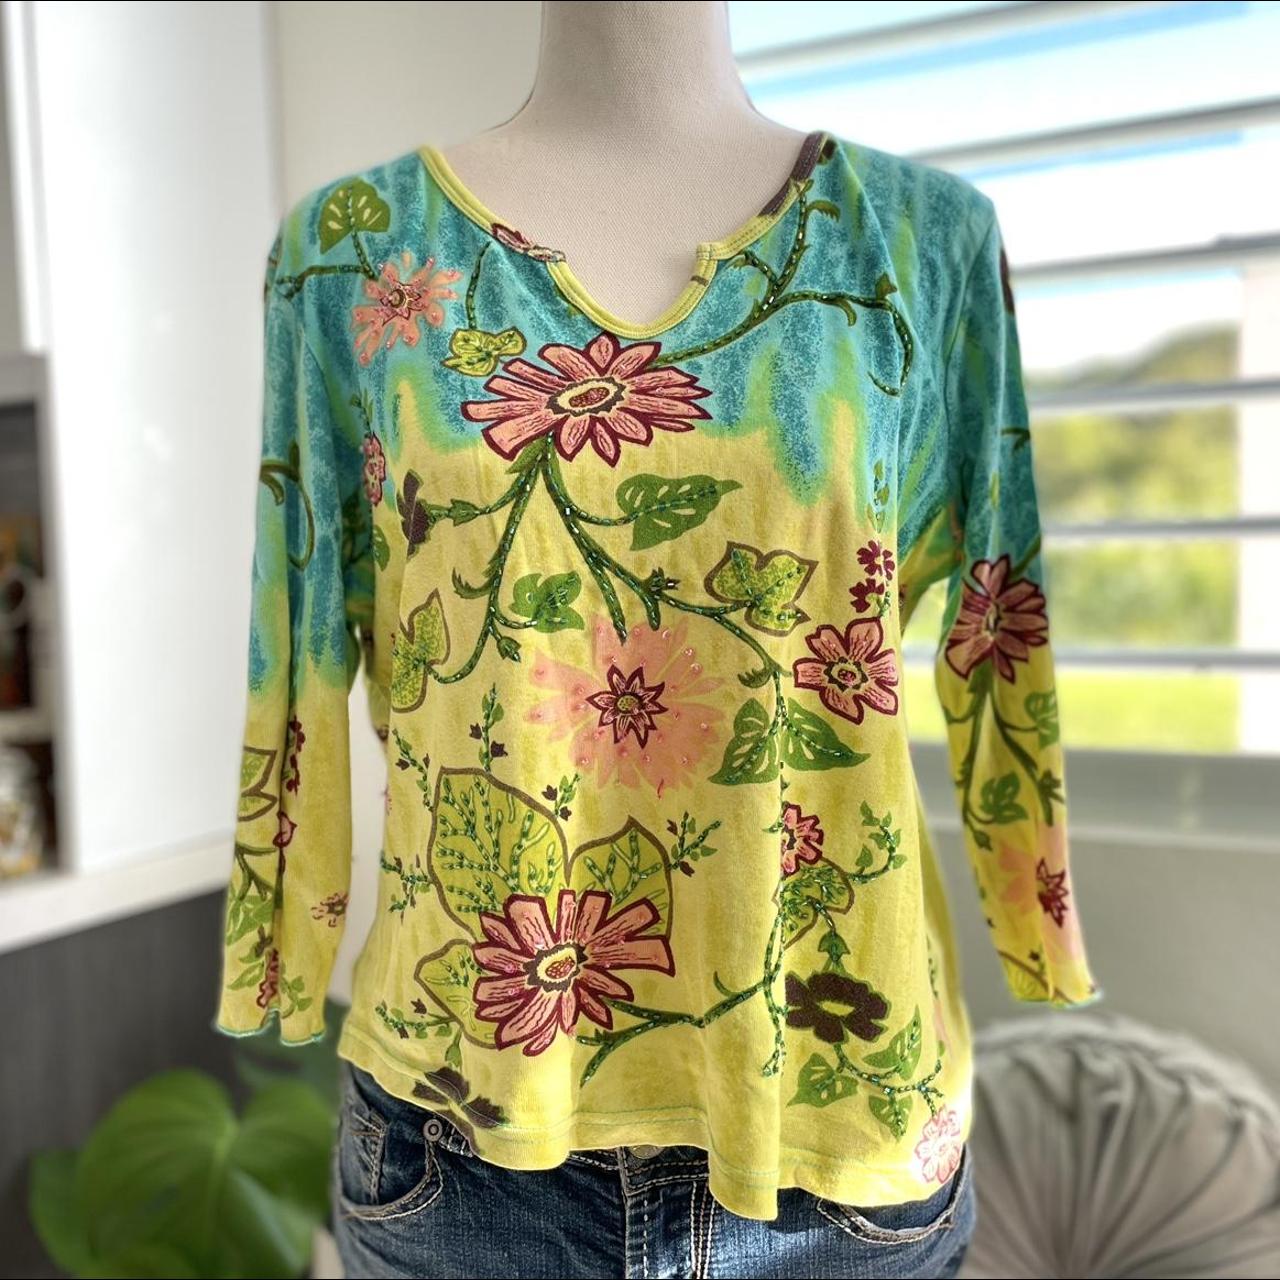 item listed by pecasthriftshop